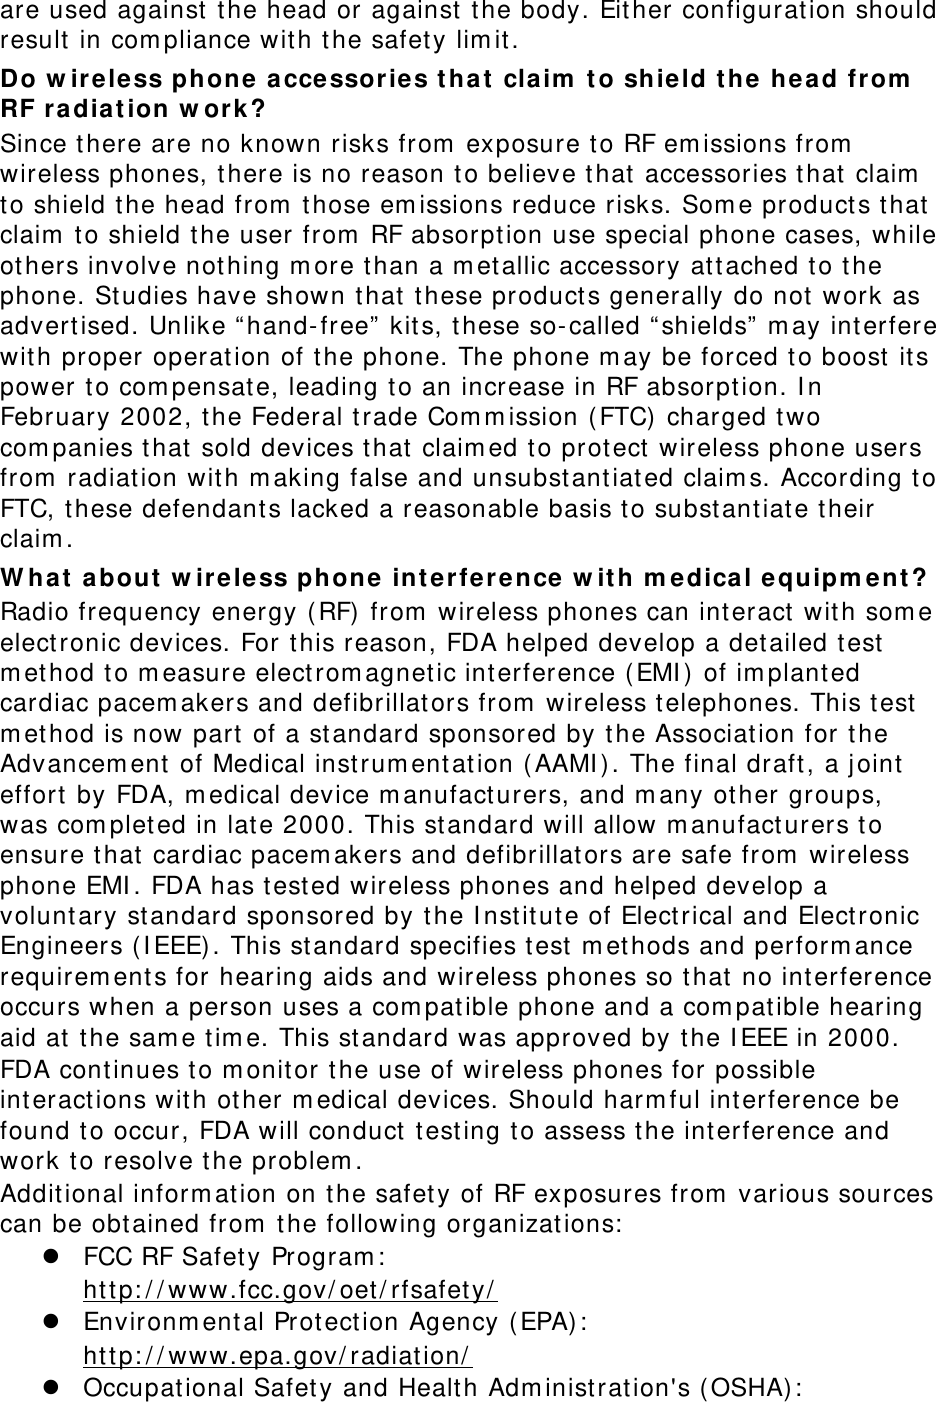 are used against  t he head or against  t he body. Eit her configurat ion should result in com pliance wit h t he safet y lim it. Do w ire le ss phone a ccessories t ha t cla im  t o shield t he he a d from  RF ra dia t ion w ork? Since there are no known risks from  exposure t o RF em issions from  wireless phones, t here is no reason t o believe t hat accessories t hat claim  to shield the head from  t hose em issions reduce risks. Som e product s t hat claim  t o shield t he user from  RF absorpt ion use special phone cases, while others involve nothing m ore than a m etallic accessory att ached t o t he phone. Studies have shown that t hese products generally do not work as advert ised. Unlike “ hand- free”  kit s, these so-called “ shields”  m ay int erfere with proper operat ion of t he phone. The phone m ay be forced t o boost  its power t o com pensat e, leading t o an increase in RF absorpt ion. I n February 2002, t he Federal t rade Com m ission ( FTC) charged t wo com panies t hat sold devices t hat claim ed t o protect  wireless phone users from  radiat ion with m aking false and unsubst ant iated claim s. According t o FTC, t hese defendants lacked a reasonable basis t o substantiat e their claim . W ha t  a bout  w ire le ss phone int e rfe r e n ce  w ith m e dical equipm ent ? Radio frequency energy ( RF)  from  wireless phones can interact with som e elect ronic devices. For t his reason, FDA helped develop a detailed test  m et hod t o m easure elect rom agnetic int erference ( EMI )  of im planted cardiac pacem akers and defibrillators from  wireless telephones. This test  m et hod is now part  of a st andard sponsored by t he Association for t he Advancem ent  of Medical instrum entation ( AAMI ) . The final draft , a j oint  effort  by FDA, m edical device m anufact urers, and m any ot her groups, was com plet ed in lat e 2000. This standard will allow m anufact urers t o ensure that cardiac pacem akers and defibrillators are safe from  wireless phone EMI . FDA has t est ed wireless phones and helped develop a volunt ary st andard sponsored by t he I nstitut e of Elect rical and Elect ronic Engineers ( I EEE) . This standard specifies t est  m ethods and perform ance requirem ent s for hearing aids and wireless phones so that no int erference occurs when a person uses a com patible phone and a com pat ible hearing aid at  t he sam e t im e. This standard was approved by t he I EEE in 2000. FDA cont inues to m onit or the use of wireless phones for possible interactions with other m edical devices. Should harm ful int erference be found to occur, FDA will conduct t est ing t o assess t he interference and work t o resolve t he problem . Additional inform at ion on t he safet y of RF exposures from  various sources can be obtained from  t he following organizat ions:  z FCC RF Safet y Program :   ht t p: / / www.fcc.gov/ oet / rfsafety/  z Environm ent al Protect ion Agency ( EPA) :   ht t p: / / www.epa.gov/ radiation/  z Occupational Safet y and Health Adm inist ration&apos;s ( OSHA) :    